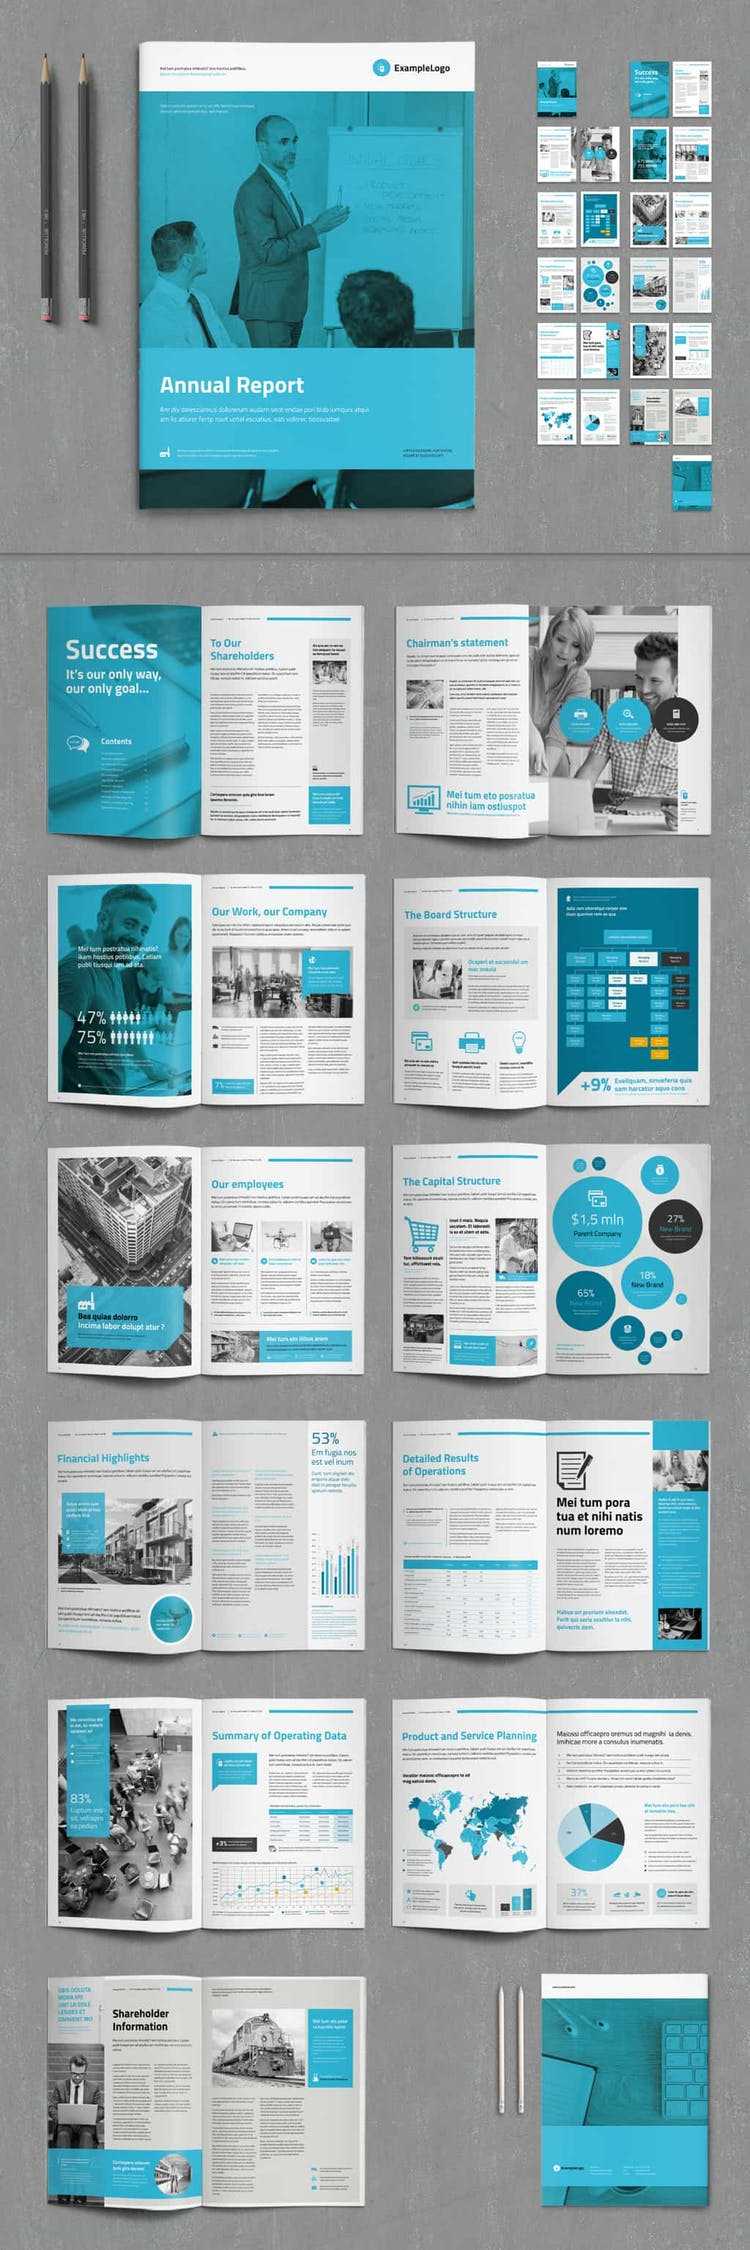 60 Best Annual Report Design Templates Throughout Chairman's Annual Report Template